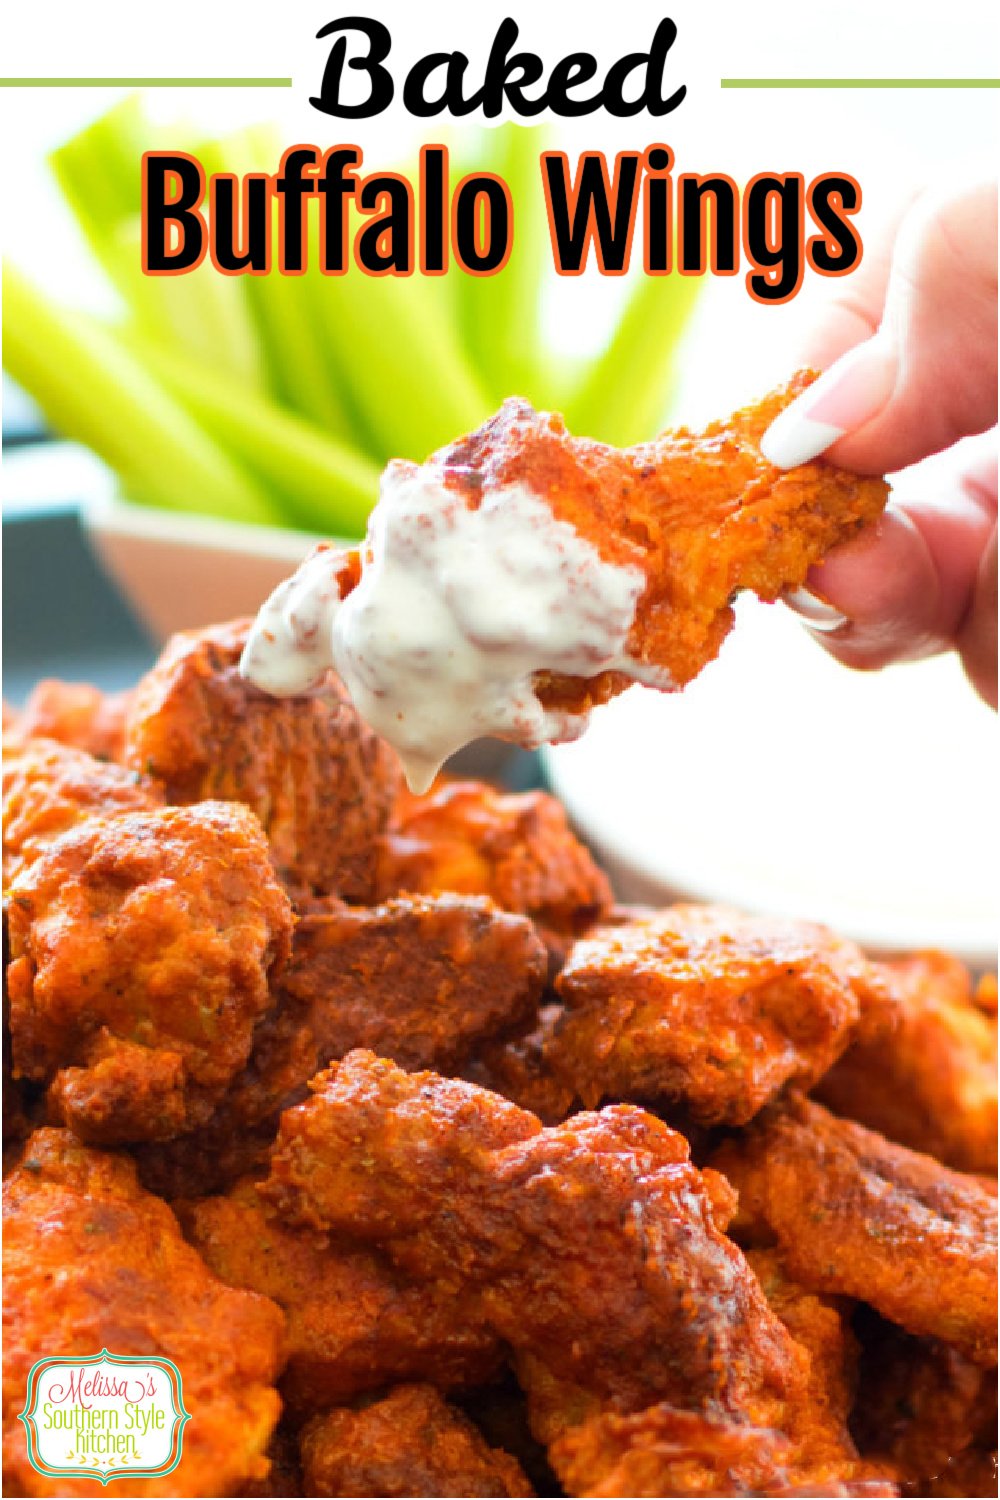 Skip the oil and make this crispy Baked Buffalo Wings Recipe in the oven in a snap #wings #buffalowings #chickenwings #bakedbuffalowings #chicken #chickenrecipes #easywings #easyrecipes #partyfood #appetizer #classicbuffalowingsrecipe #southernrecipes #bestbuffalowingsrecipe #southernfood #melissassouthernstylekitchen via @melissasssk